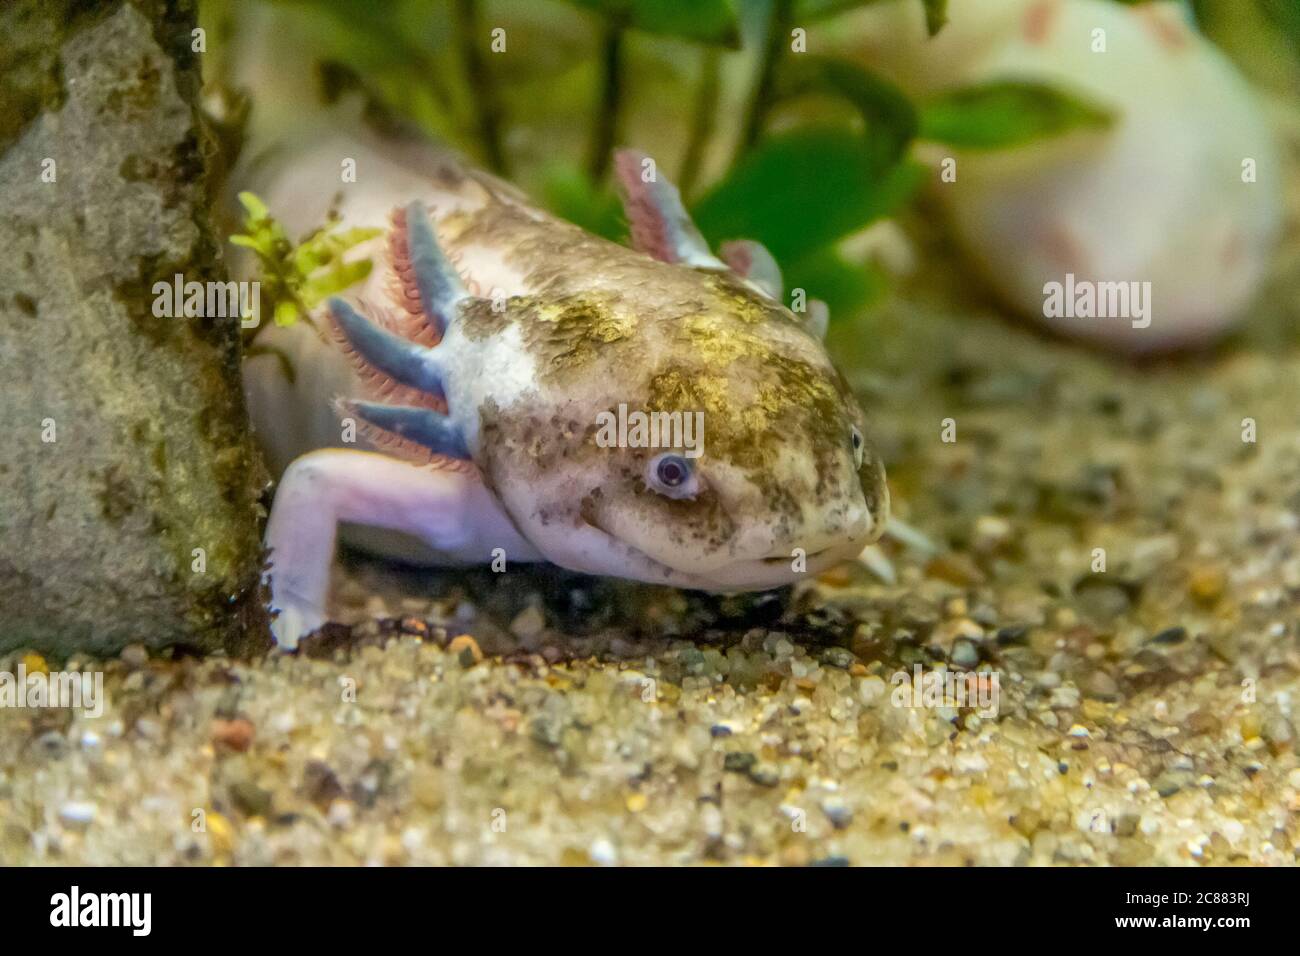 underwater scenery showing a Axolotl on sandy ground Stock Photo